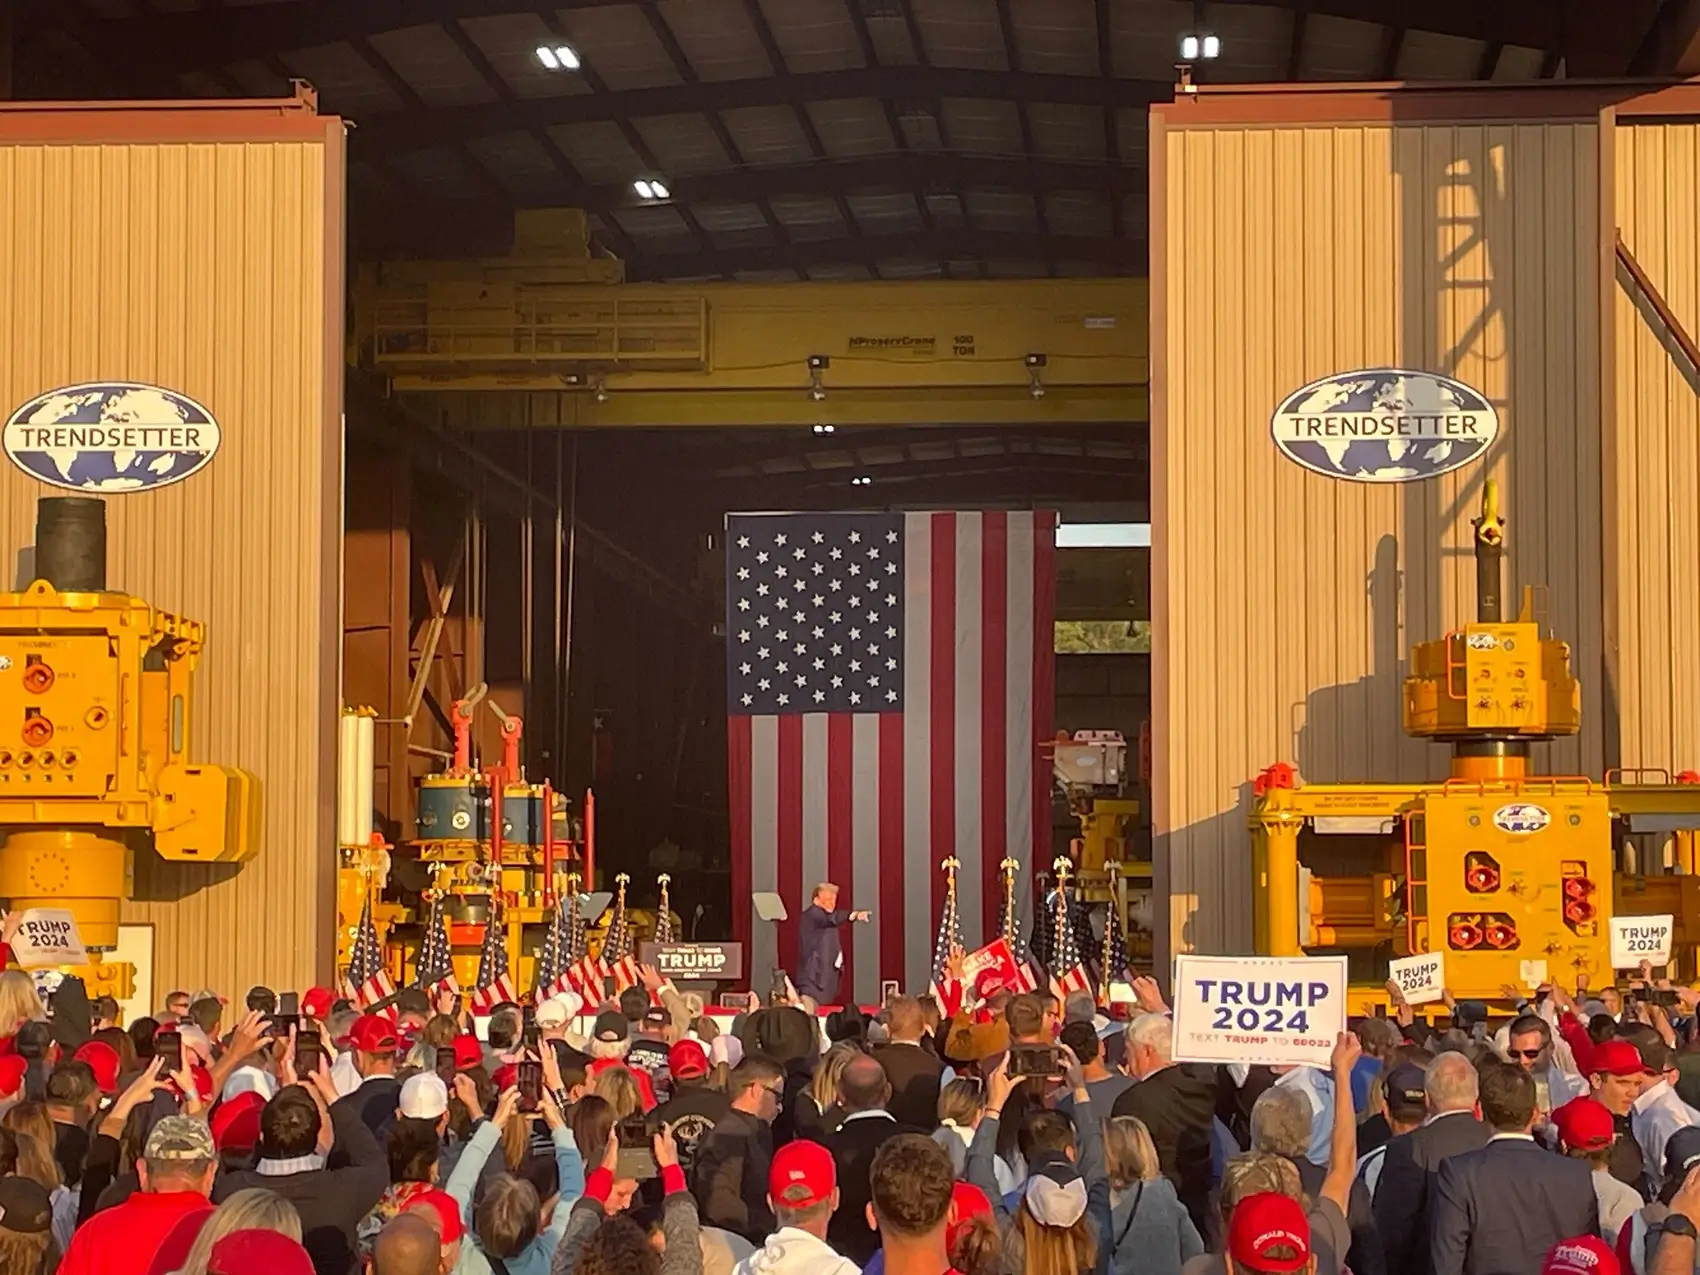 Former President Donald Trump traveled to the Houston headquarters of an offshore drilling company on Thursday and spoke to more than 1,000 supporters.